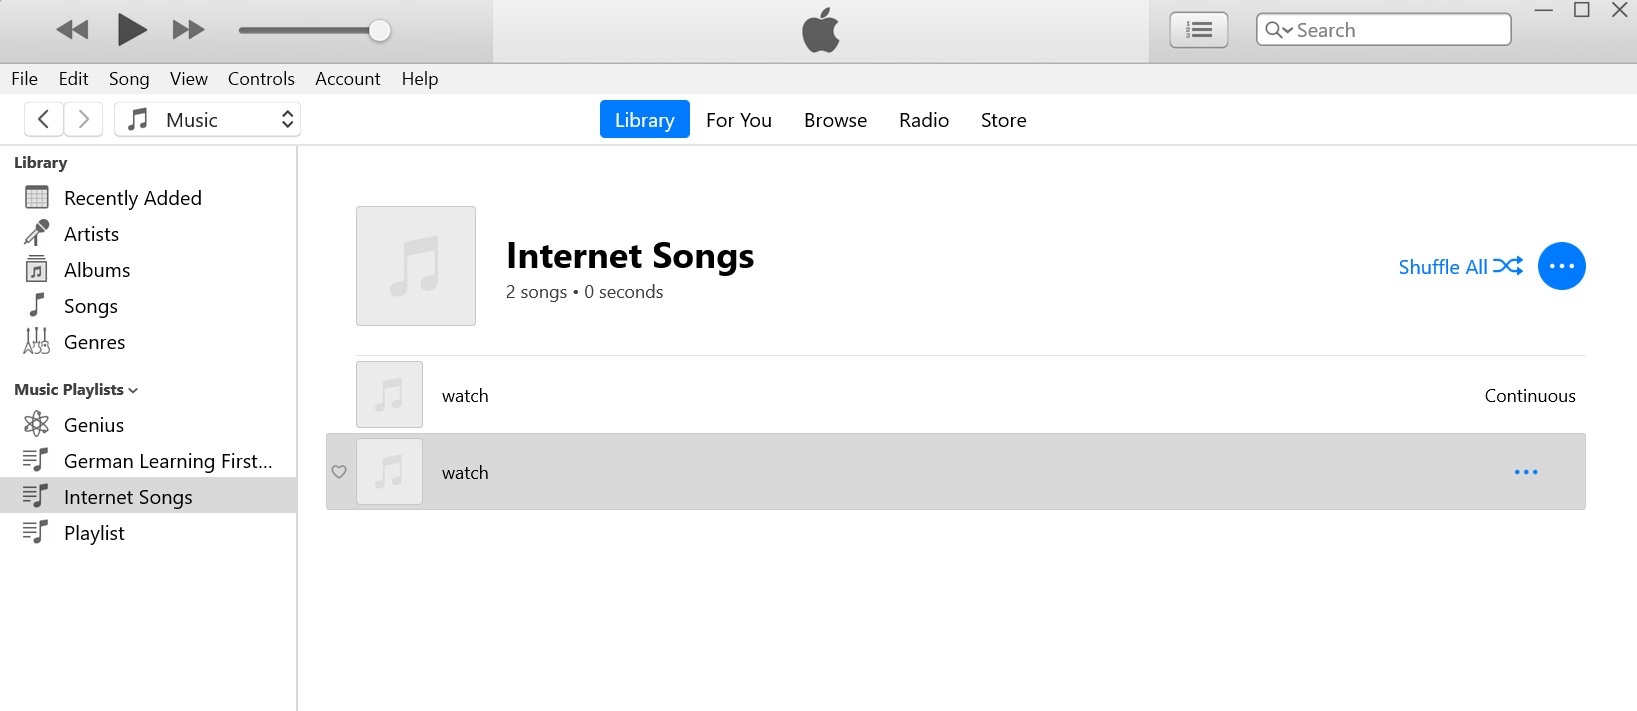 The homepage of the iTunes Windows App displaying a playlist